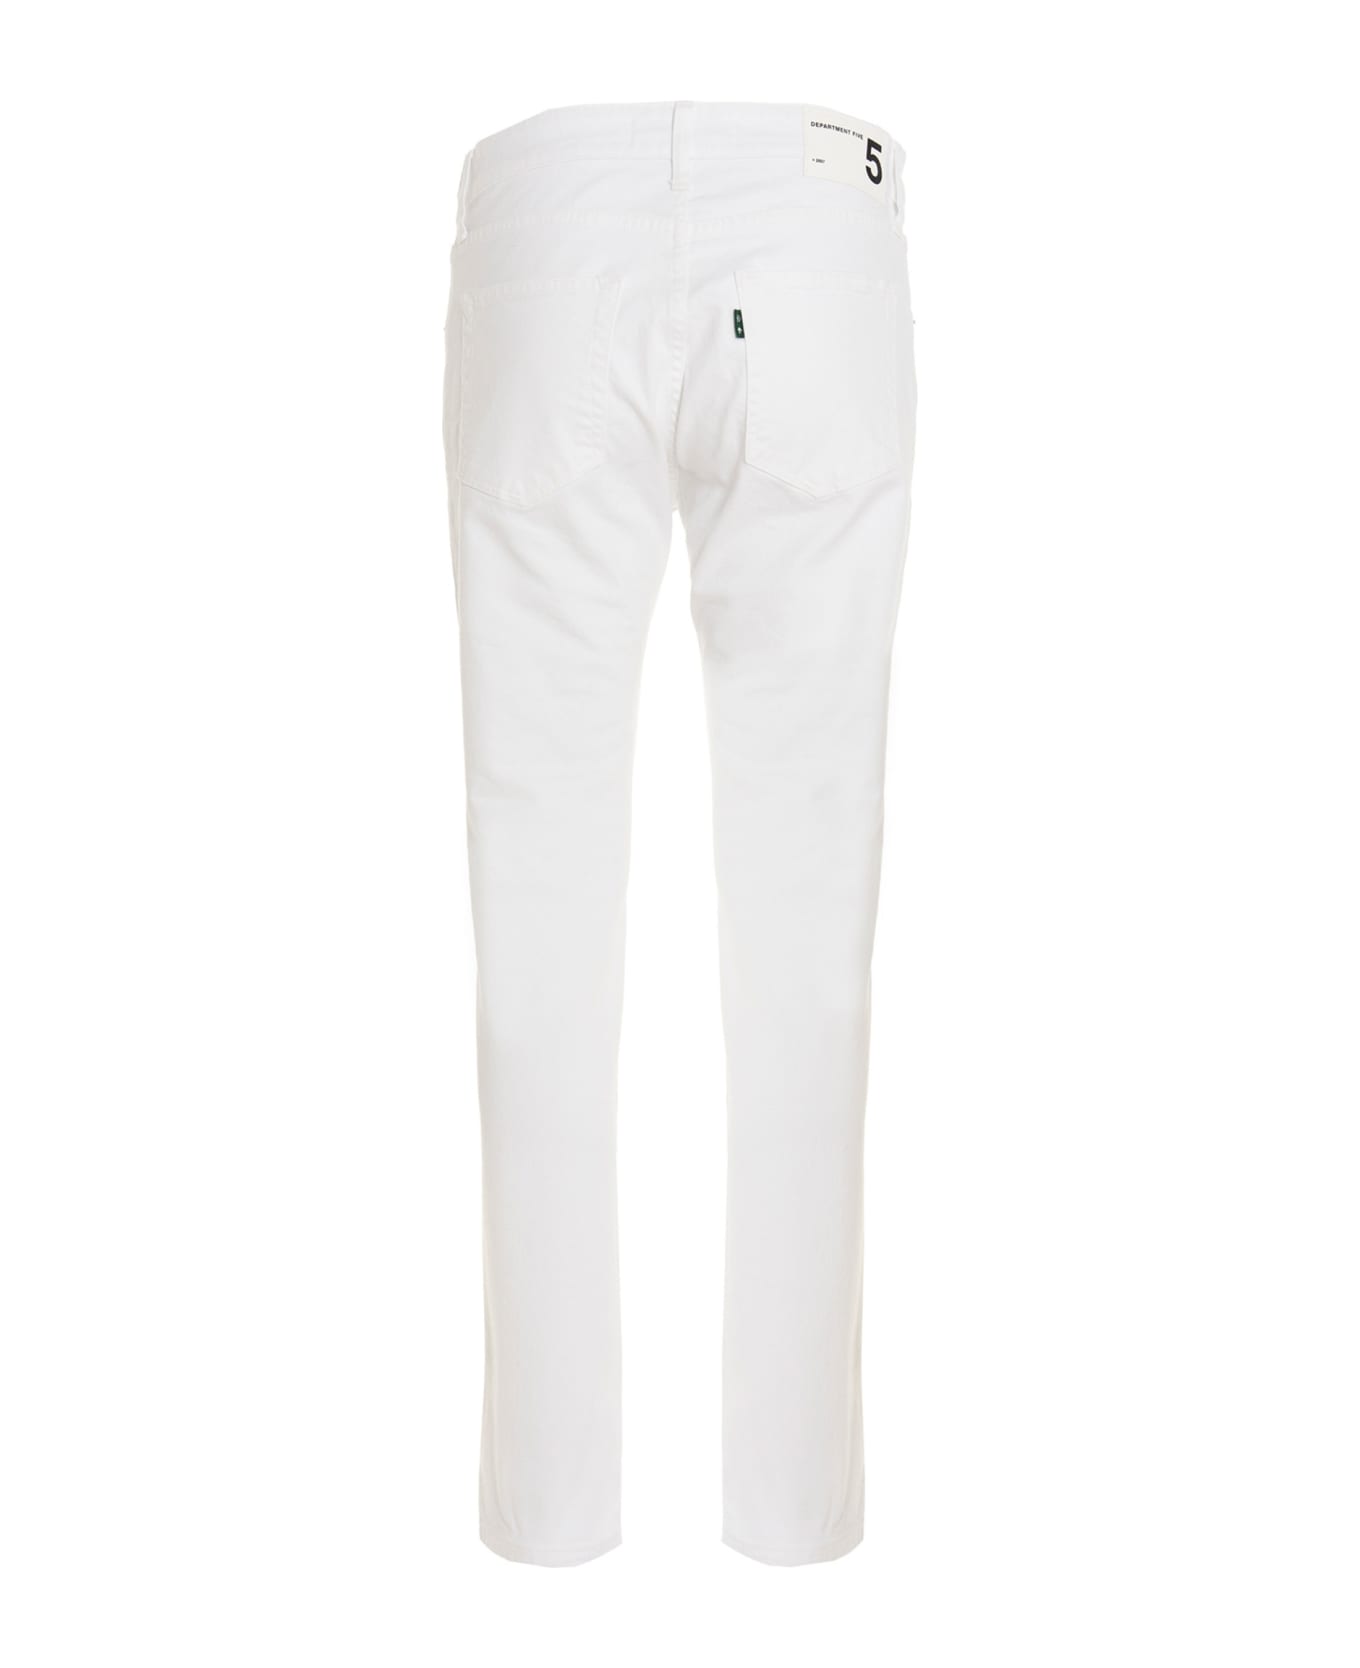 Department Five 'skeith' Jeans - White ボトムス